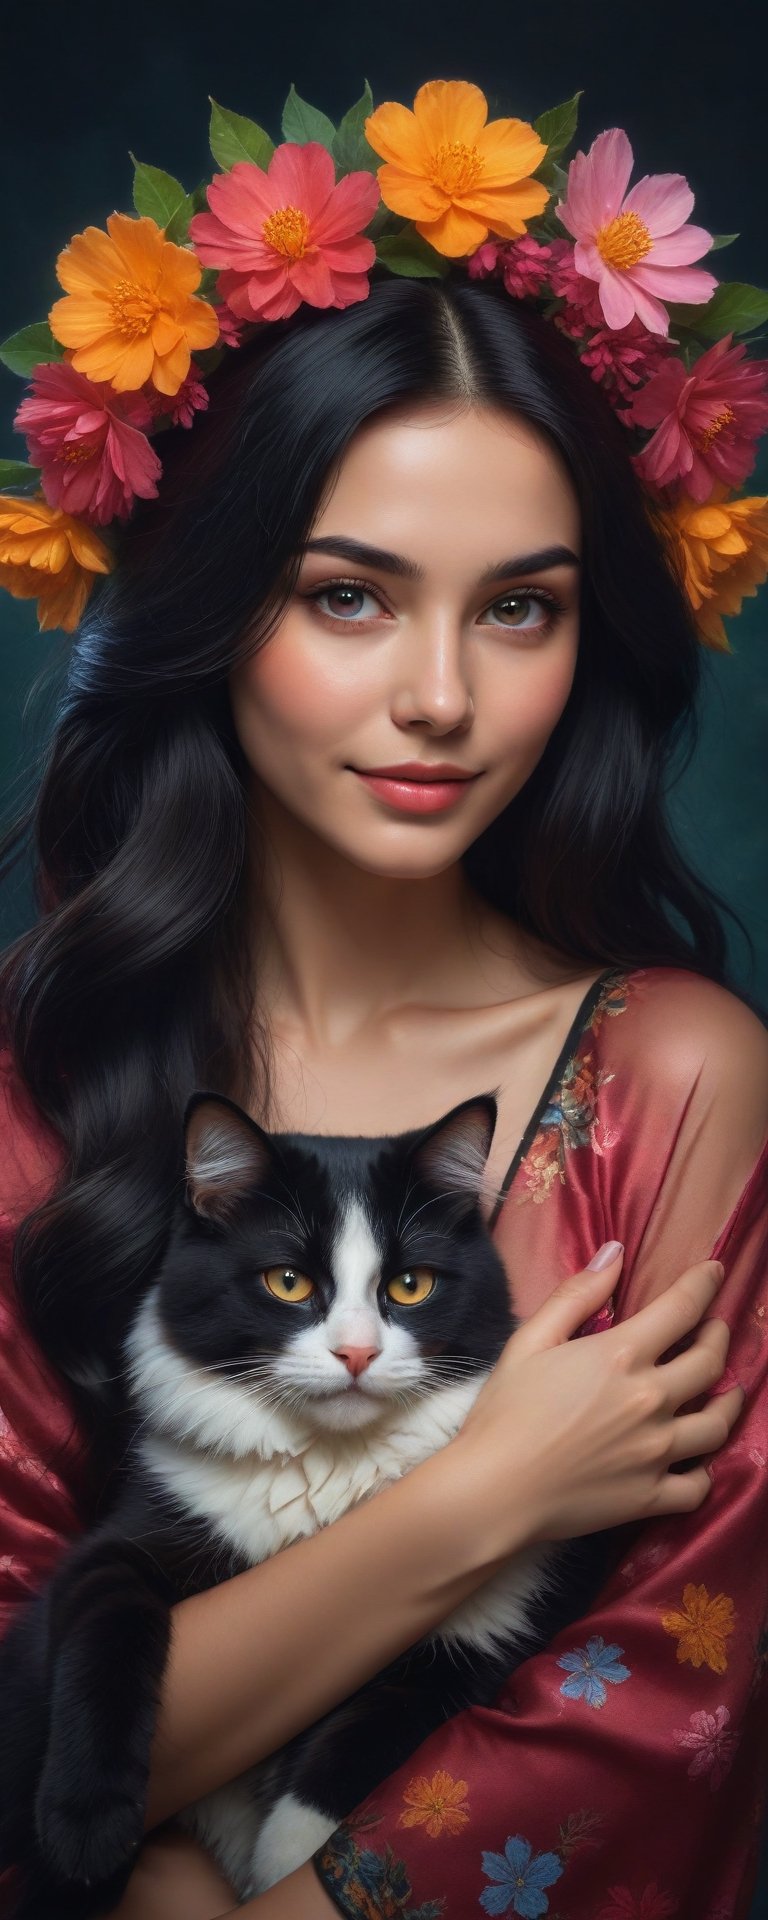 (masterpiece, best quality, ultra-detailed, 8K),high detail, realisitc detailed,
a beautiful young woman with long flowy black hair over shoulders in the dark, glowing colorful outfits, cuddling a cat, wreath, brown eyes, pale soft skin, kind smile, glossy lips, details of colorful flowers,
a serene and contemplative mood,well lit  background consists of glowing clover leaves,colorful